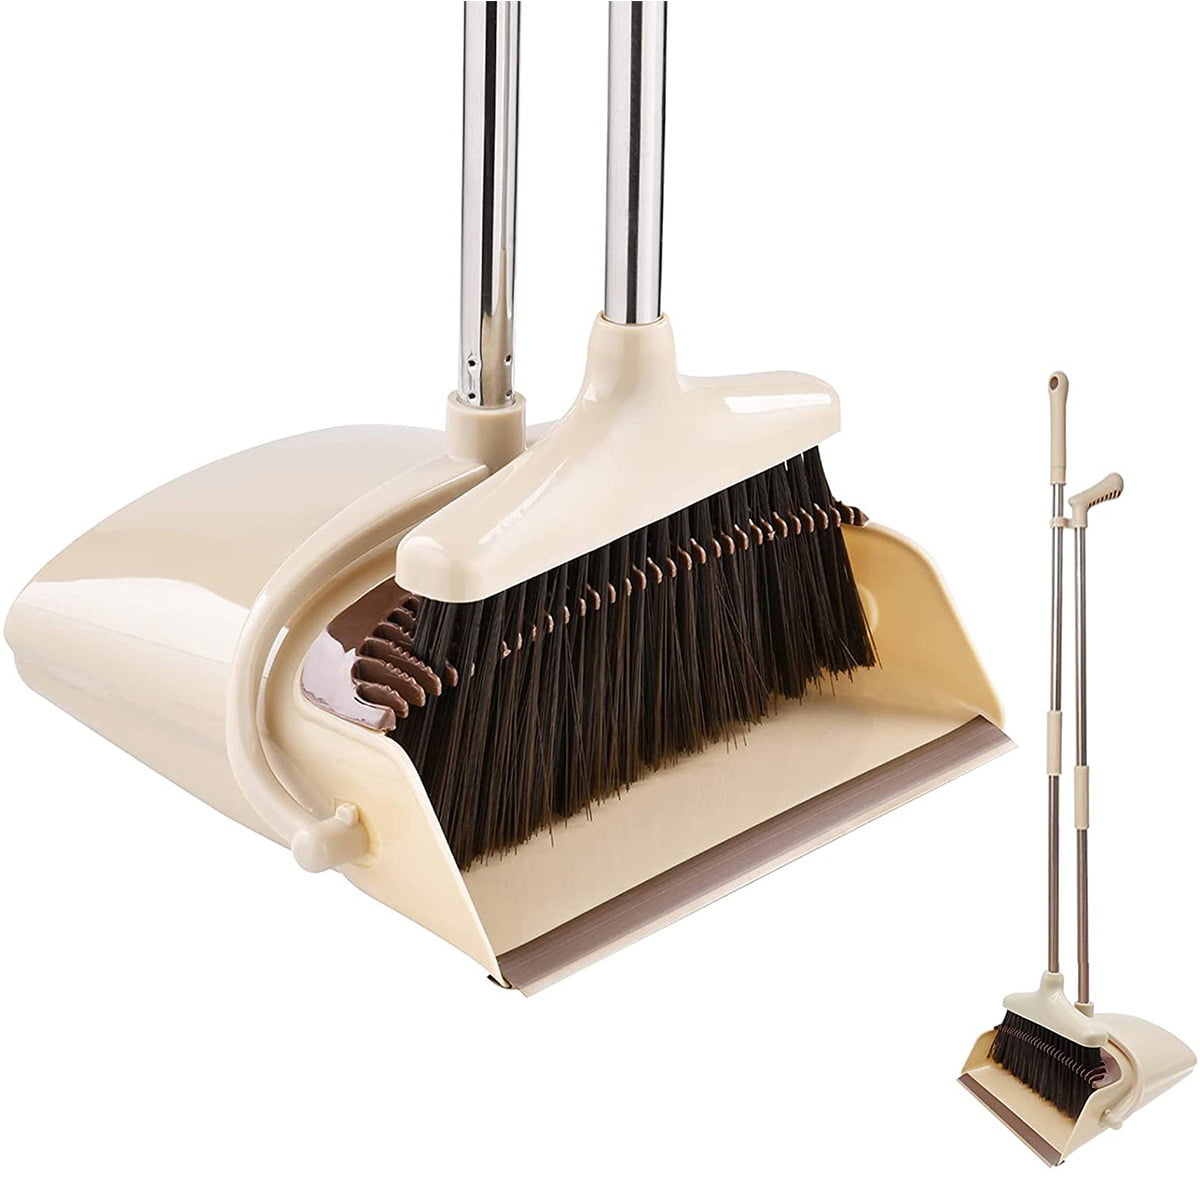 Masthome Long Handled Dustpan and Brush Comb Tall Broom and Upright Dustpan 